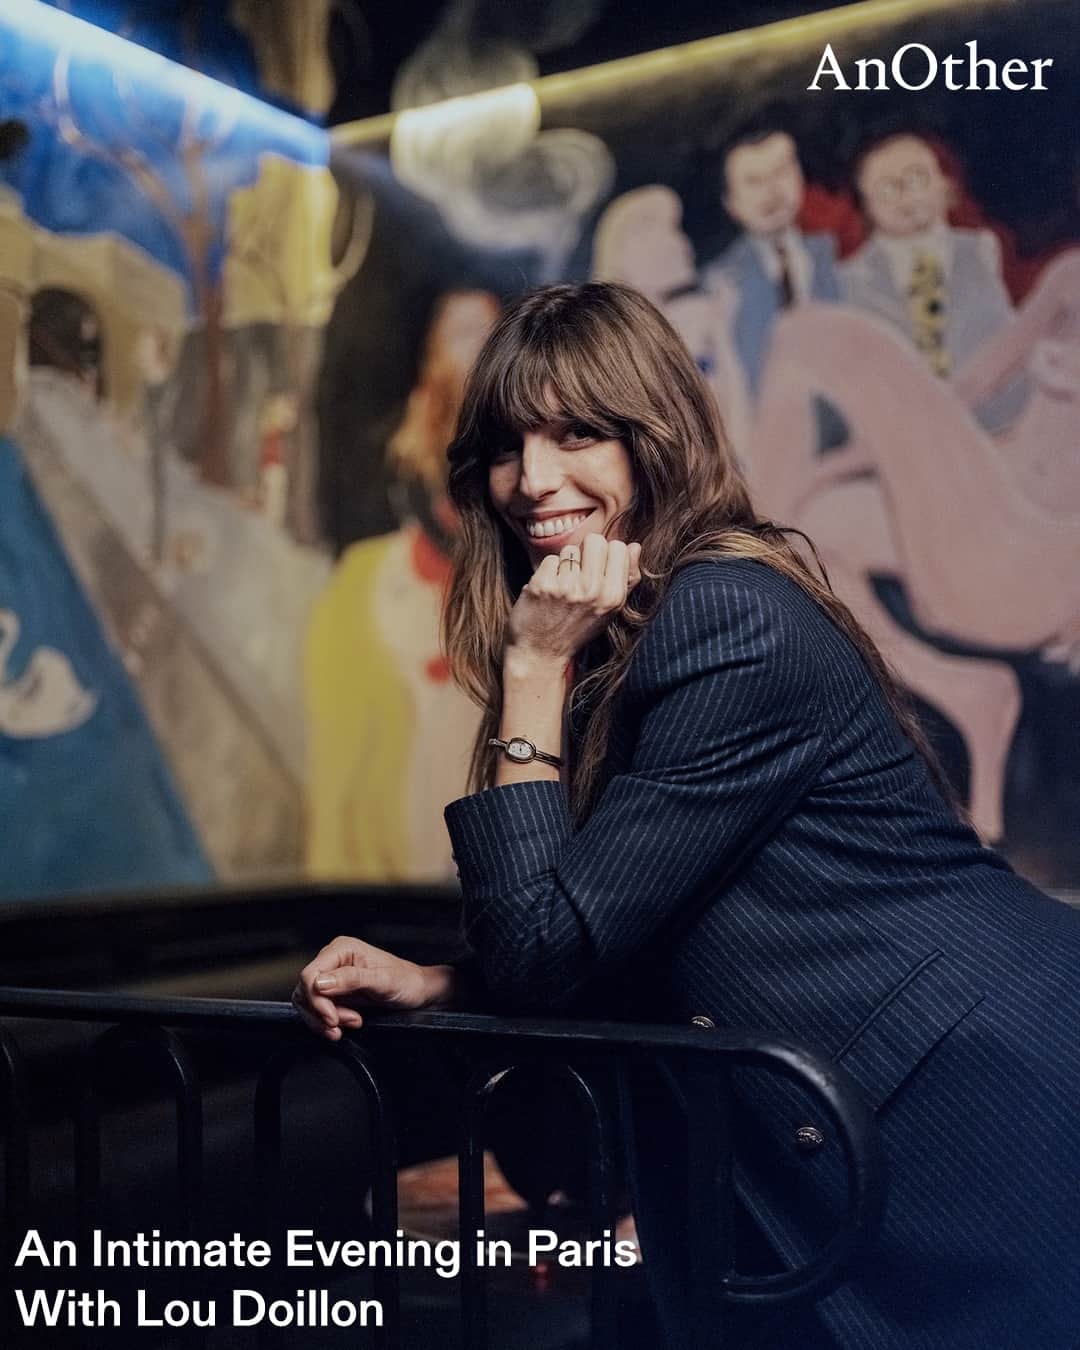 AnOther Magazineのインスタグラム：「At the iconic @castelparis, @cartier hosted a glittering event honouring the Baignoire watch, featuring an emotional performance from @loudoillon 🎶⁠ ⁠ “J’aime les filles, de Chez Castel … ” sang Jacques Dutronc in 1967. The private club in Paris has hosted a long and splendid list of society’s brightest stars who have all lounged in their famed red velvet seats; John Galliano and Karl Lagerfeld have each hosted fashion week celebrations there amidst the beaming gilded decor.⁠ ⁠ At the link in bio, we recount what went down at the event, which saw Doillon perform to a huddled, adoring crowd 📲⁠ ⁠ 📸 1. Lou Doillon. Photography by @virgile.guinard. Courtesy of Cartier⁠ 2-4. Photography by @pierre__mouton. Courtesy of Cartier⁠ 5. Photography by Virgile Guinard. Courtesy of Cartier⁠」